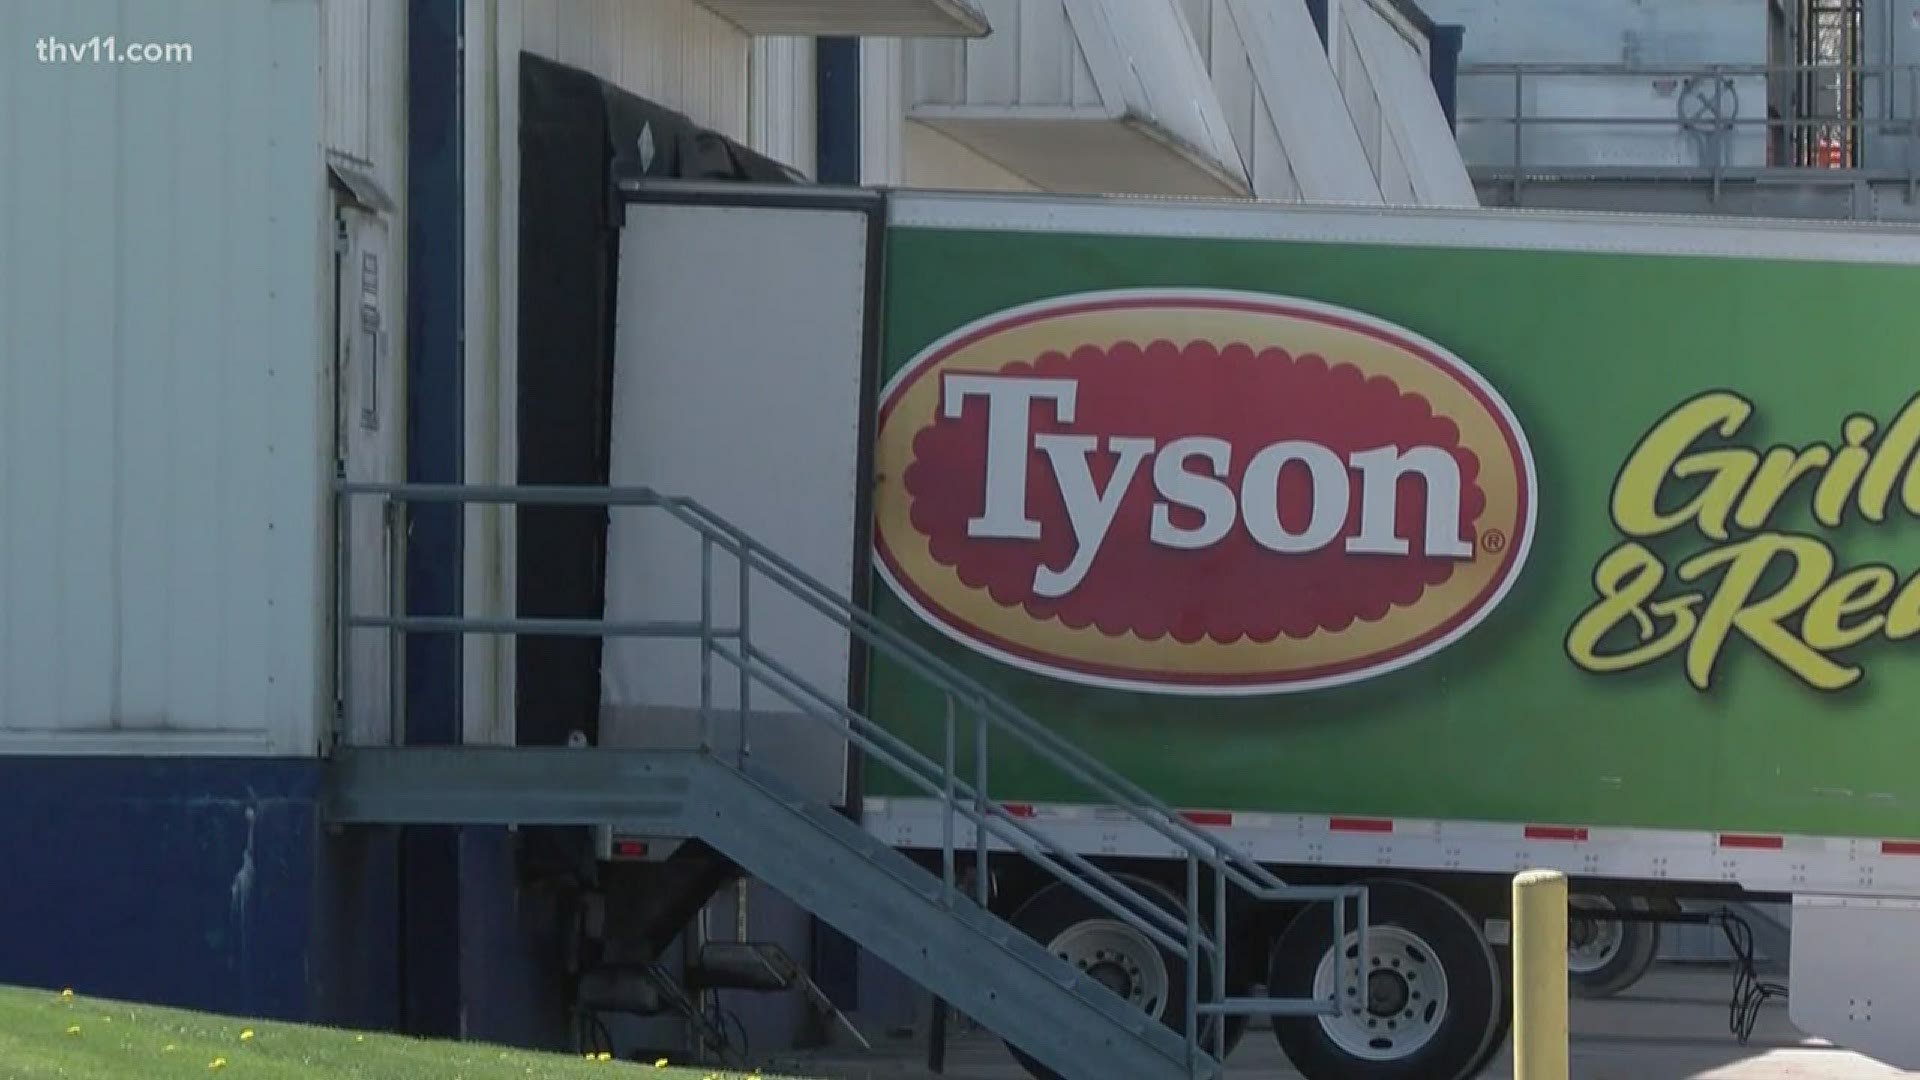 Arkansas-based Tyson foods warns a meat shortage could be on the horizon.